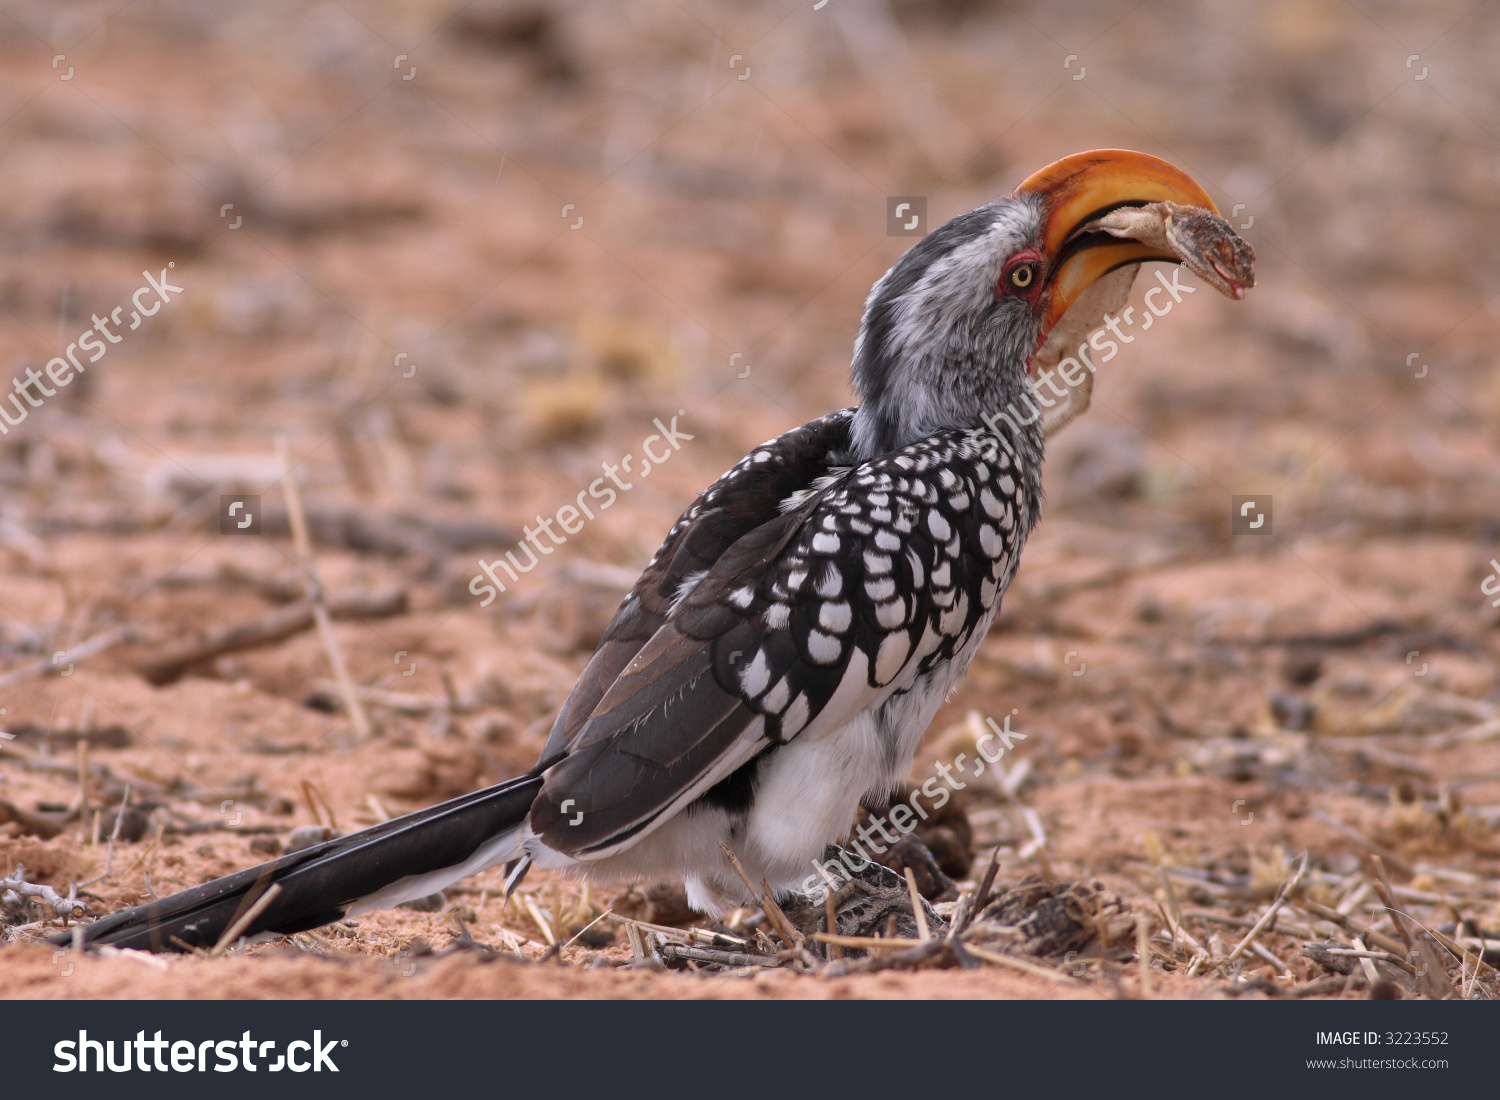 Southern Yellow-billed Hornbill clipart #1, Download drawings